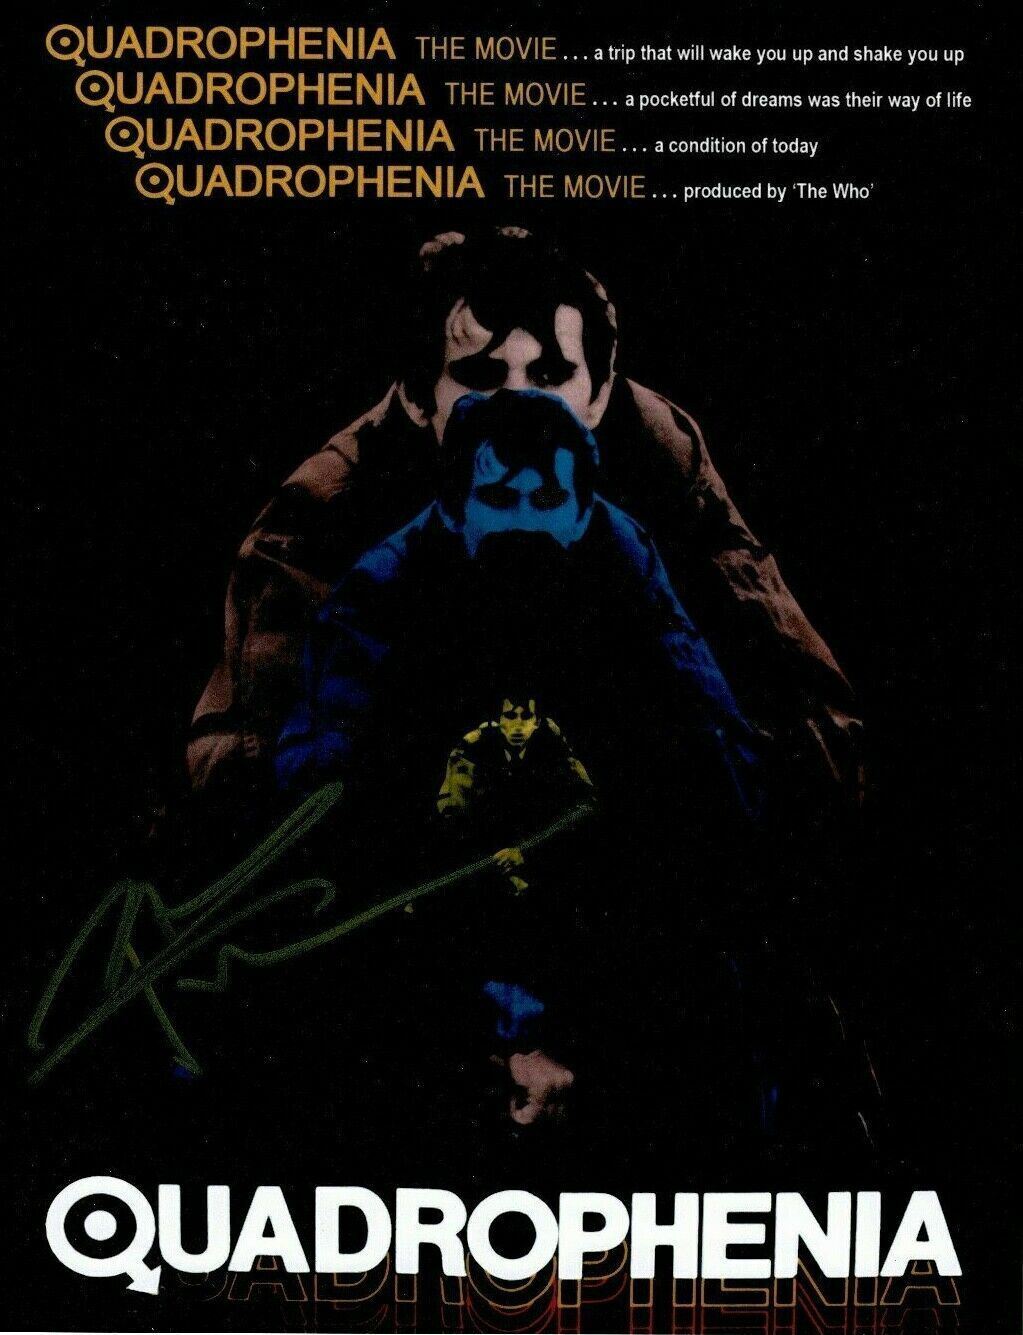 Pete Townshend SIGNED 11X14 Photo Poster painting Quadrophenia Movie Poster AFTAL COA (A)